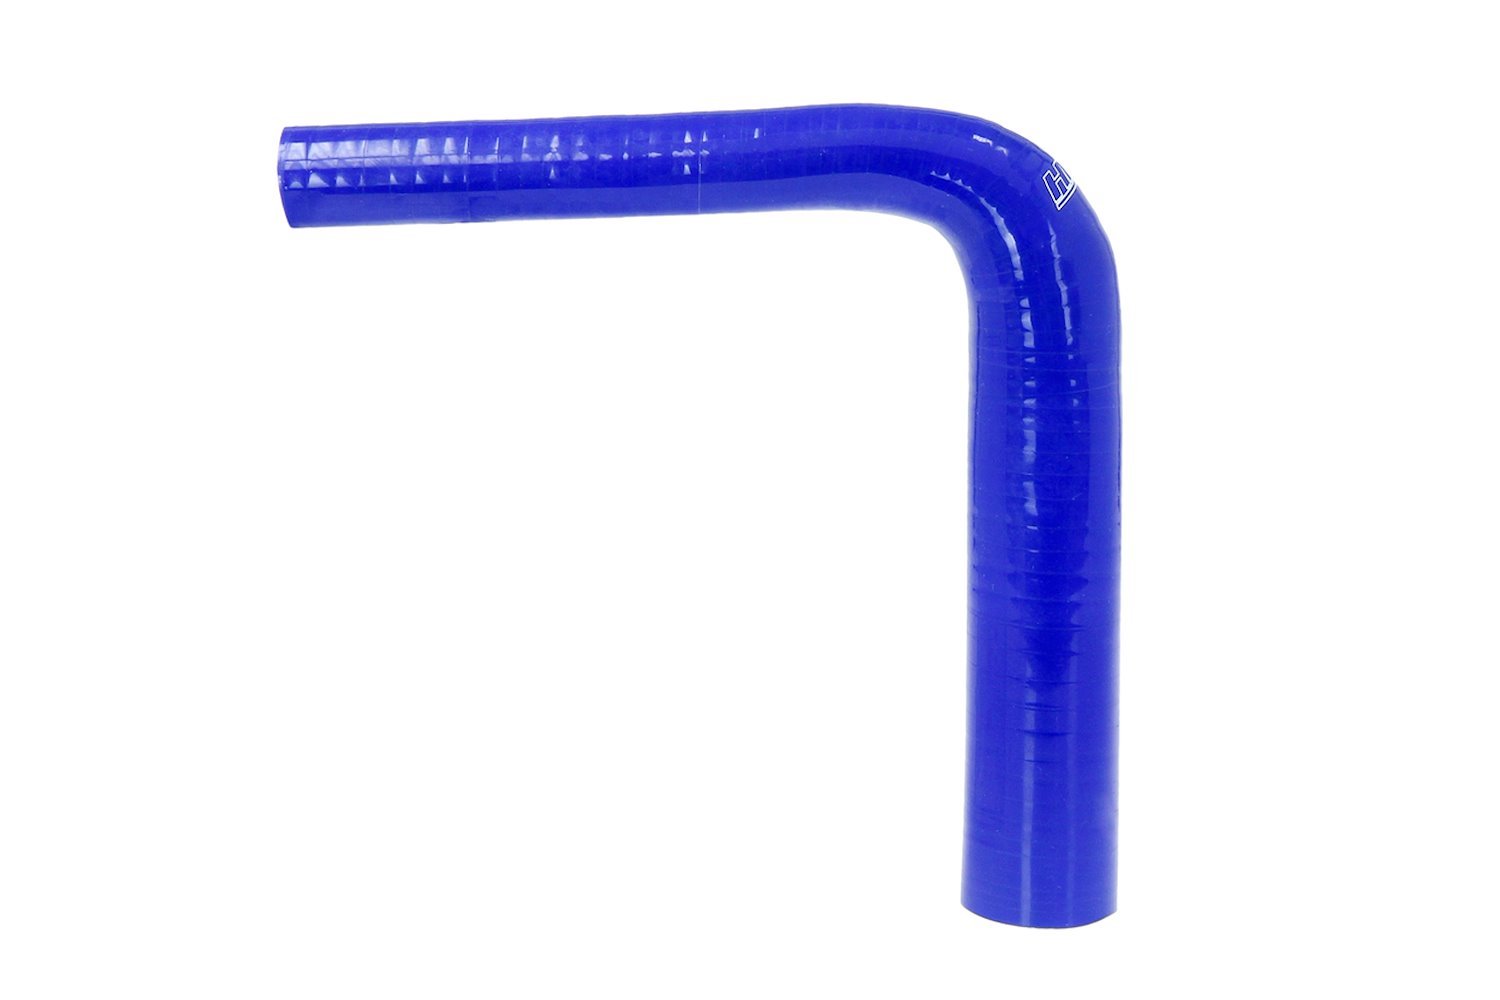 HTSER90-050-100-BLUE Silicone 90-Degree Elbow Hose, High-Temp 4-Ply Reinforced, 1/2 in. - 1 in. ID, Blue